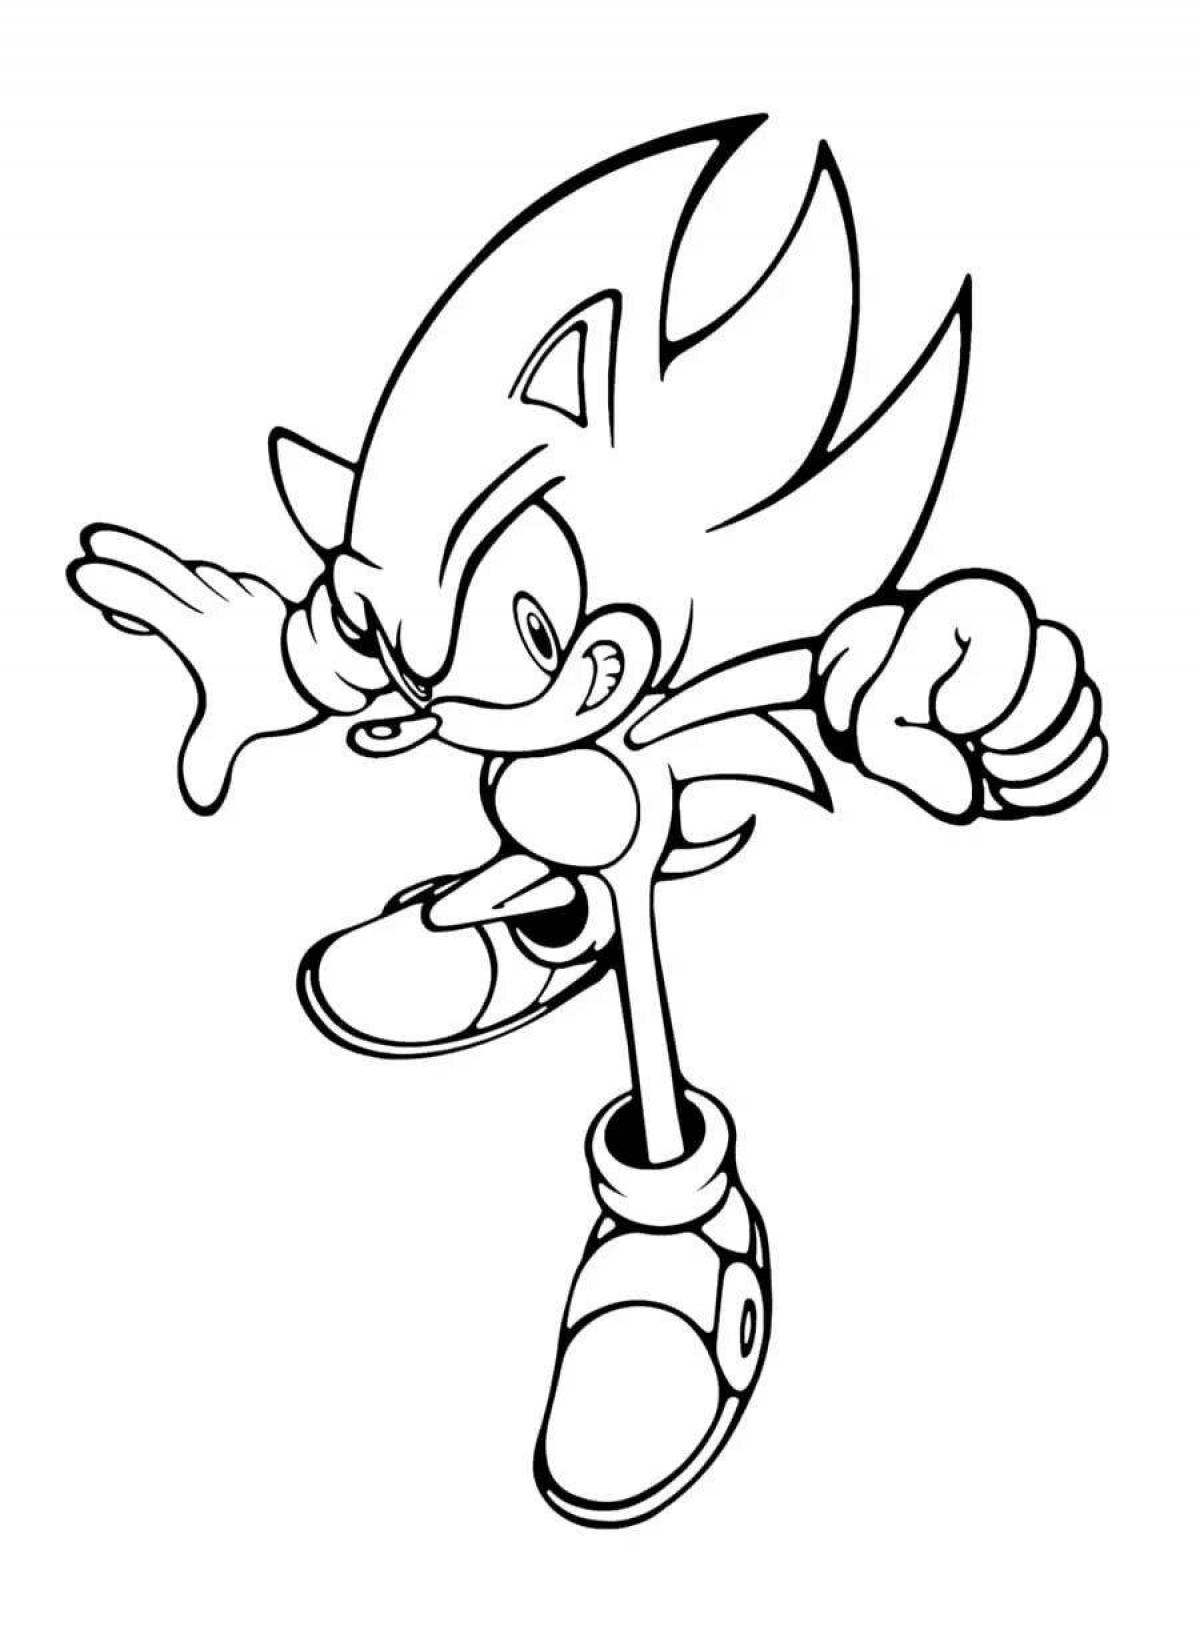 Sonic the hedgehog bright coloring